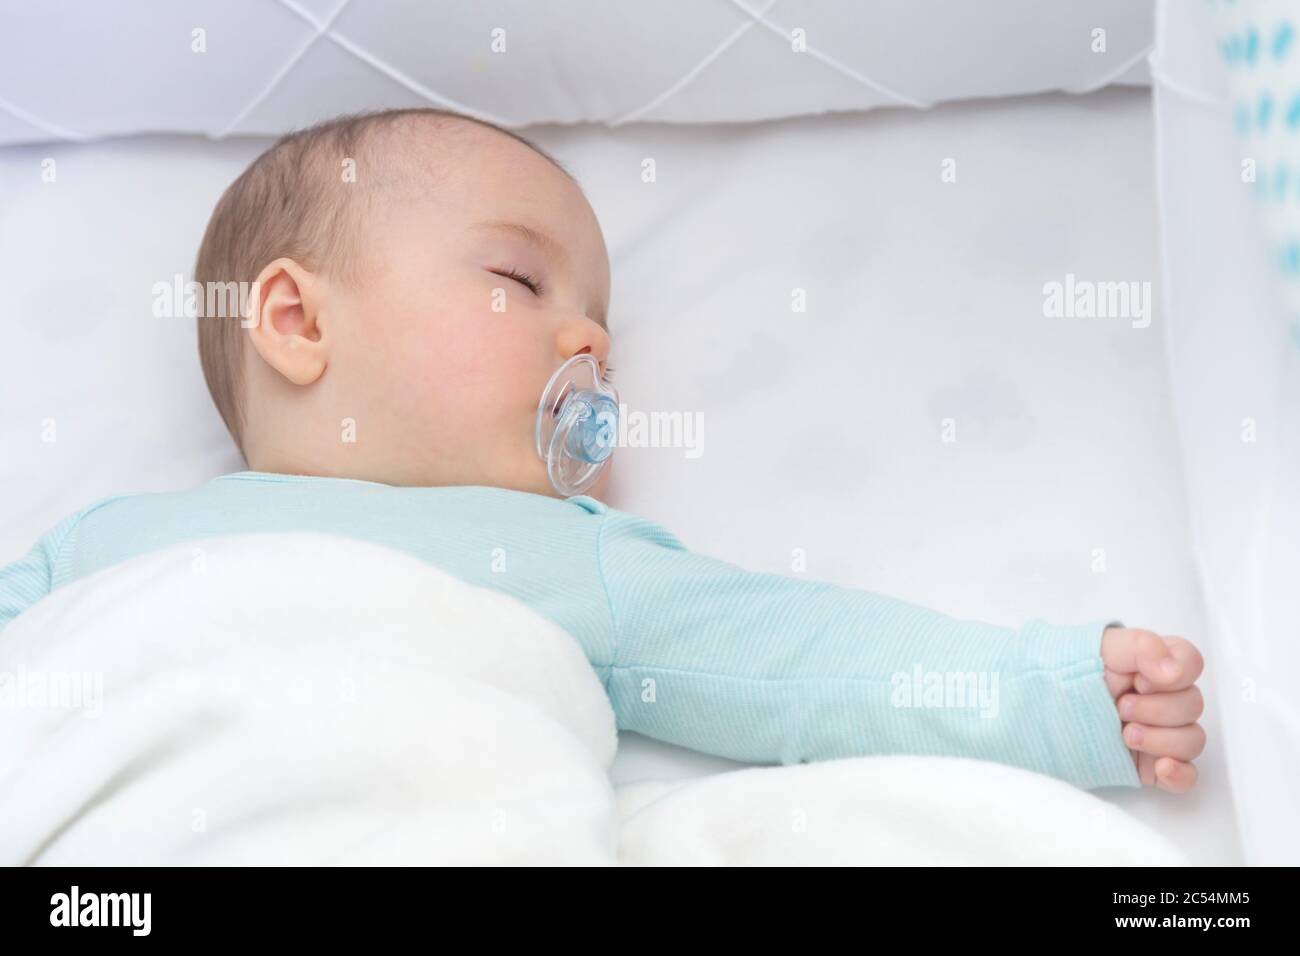 Baby boy sleeping with open arms in a cradle . Light blue pajama and white bed sheets. A pacifier in his mouth. Stock Photo